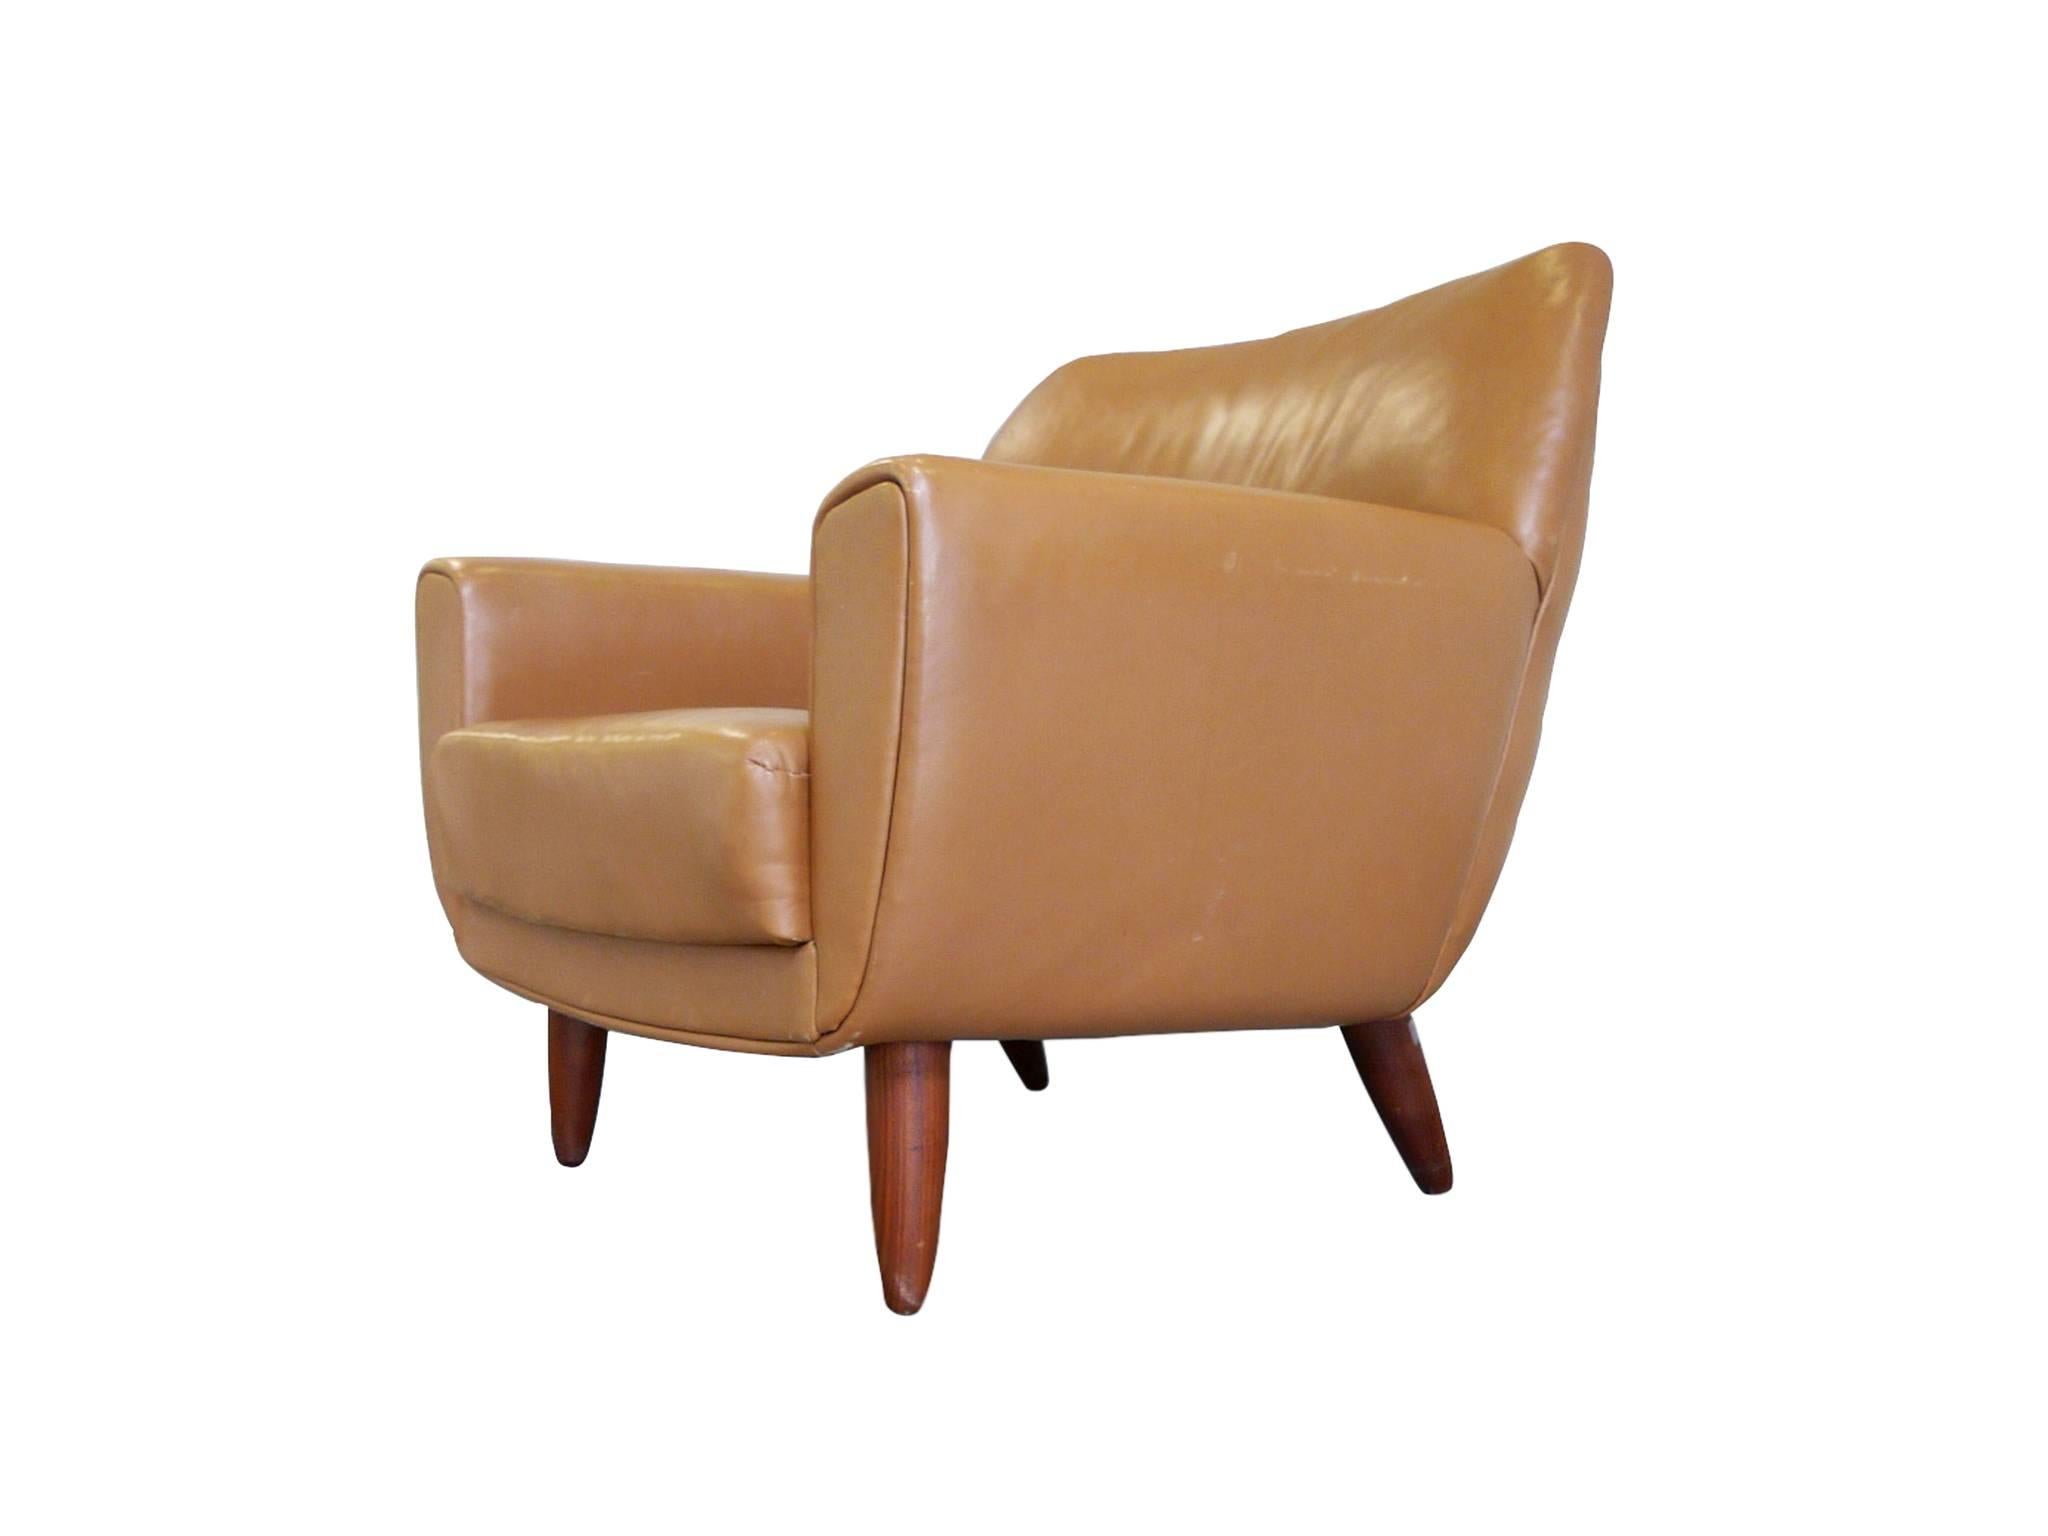 This handsome tan lounge chair was designed by the Danish designer Illum Wikkelsø in the mid-20th century. It is a rare find. The chair is comprised of teak frame and legs and leather upholstery. Like many of his furniture designs, this chair